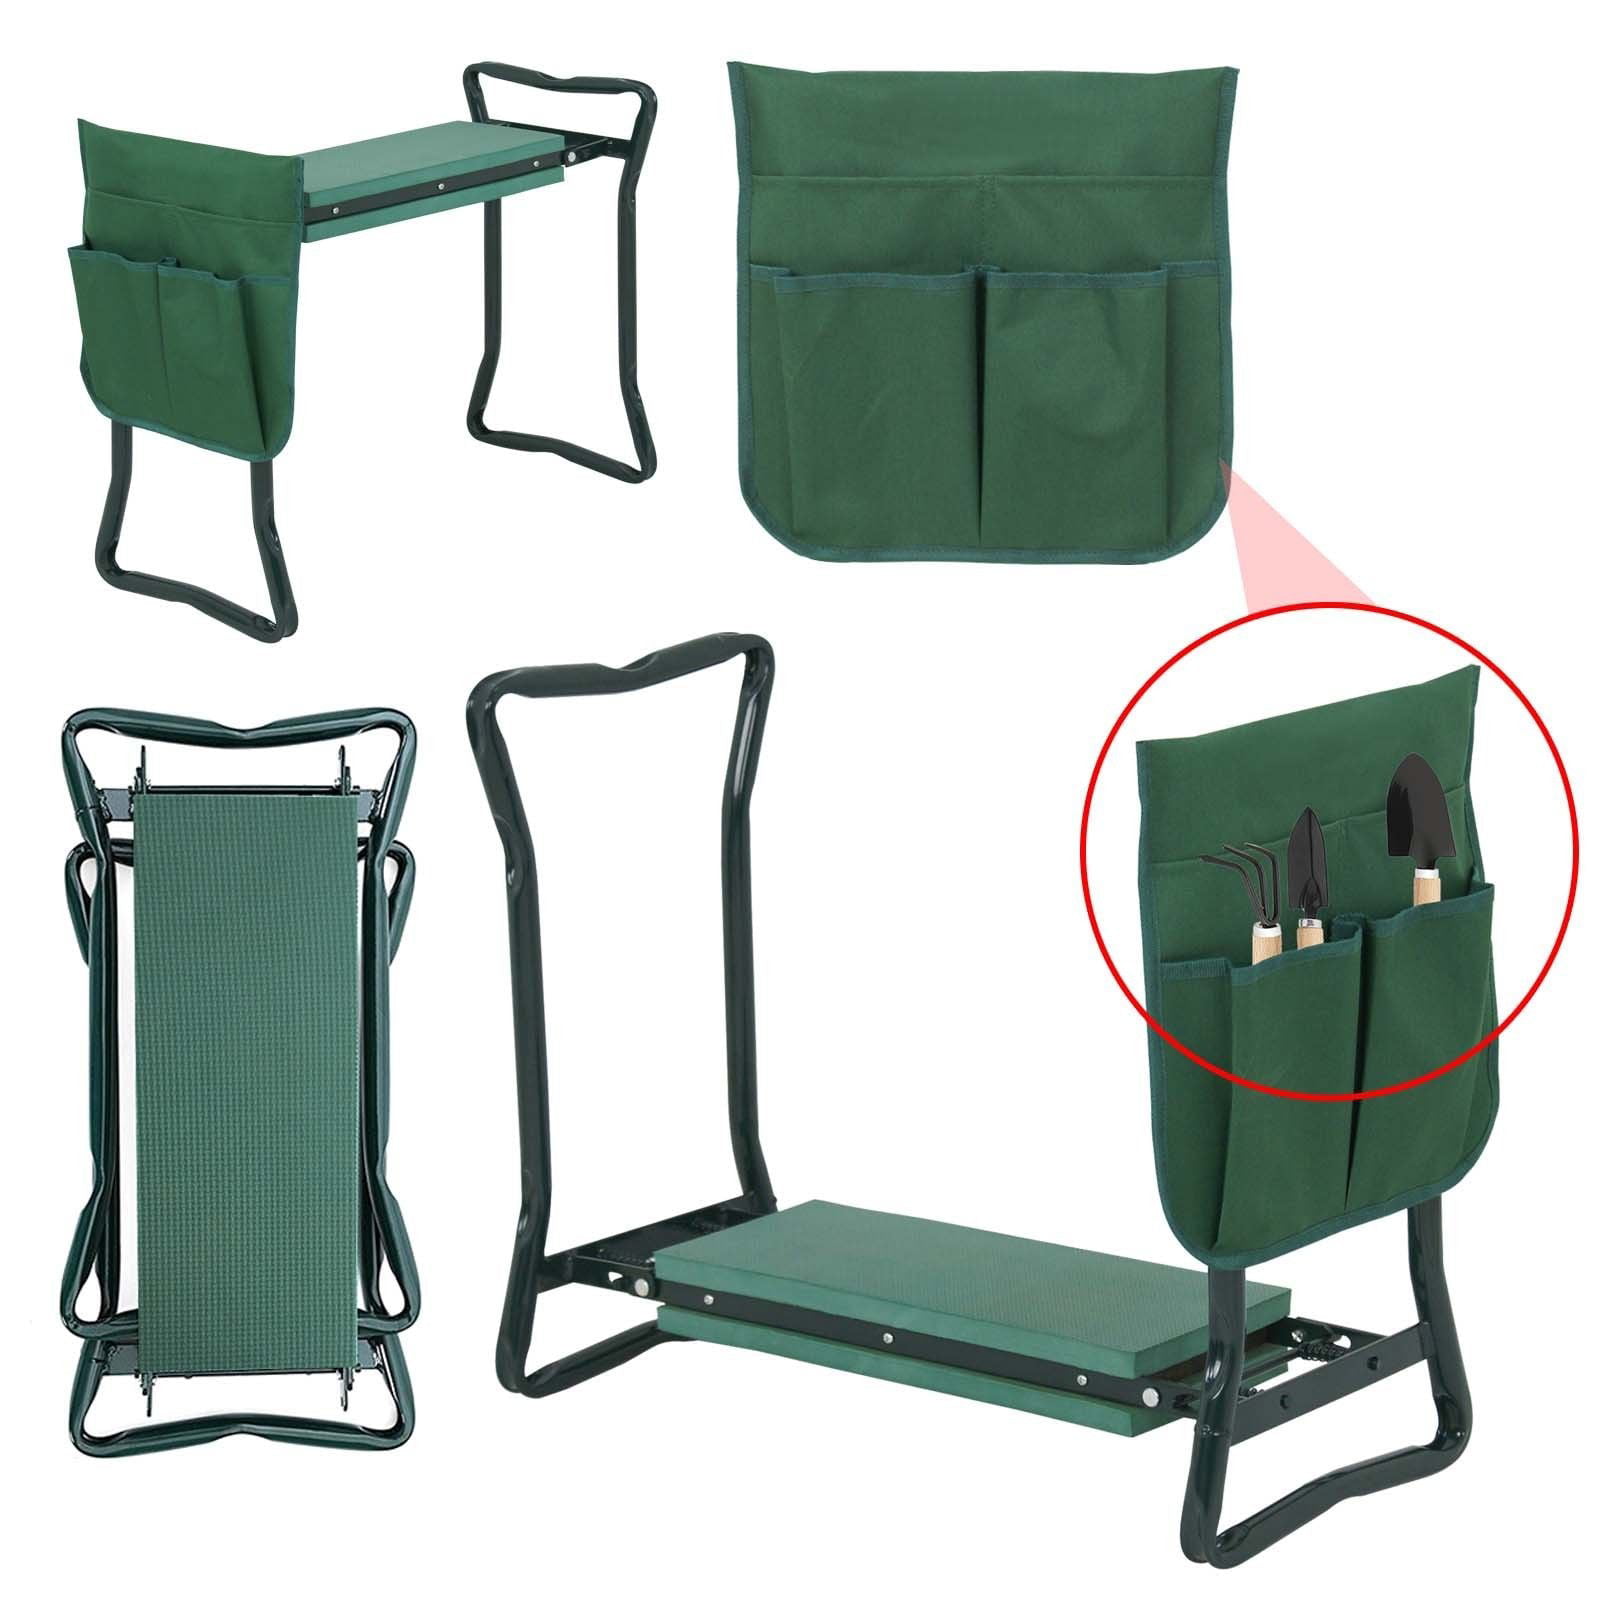 Tool Pouch Garden Kneeler Seat Foldable Soft Kneeling Pad Bench Portable Stool 